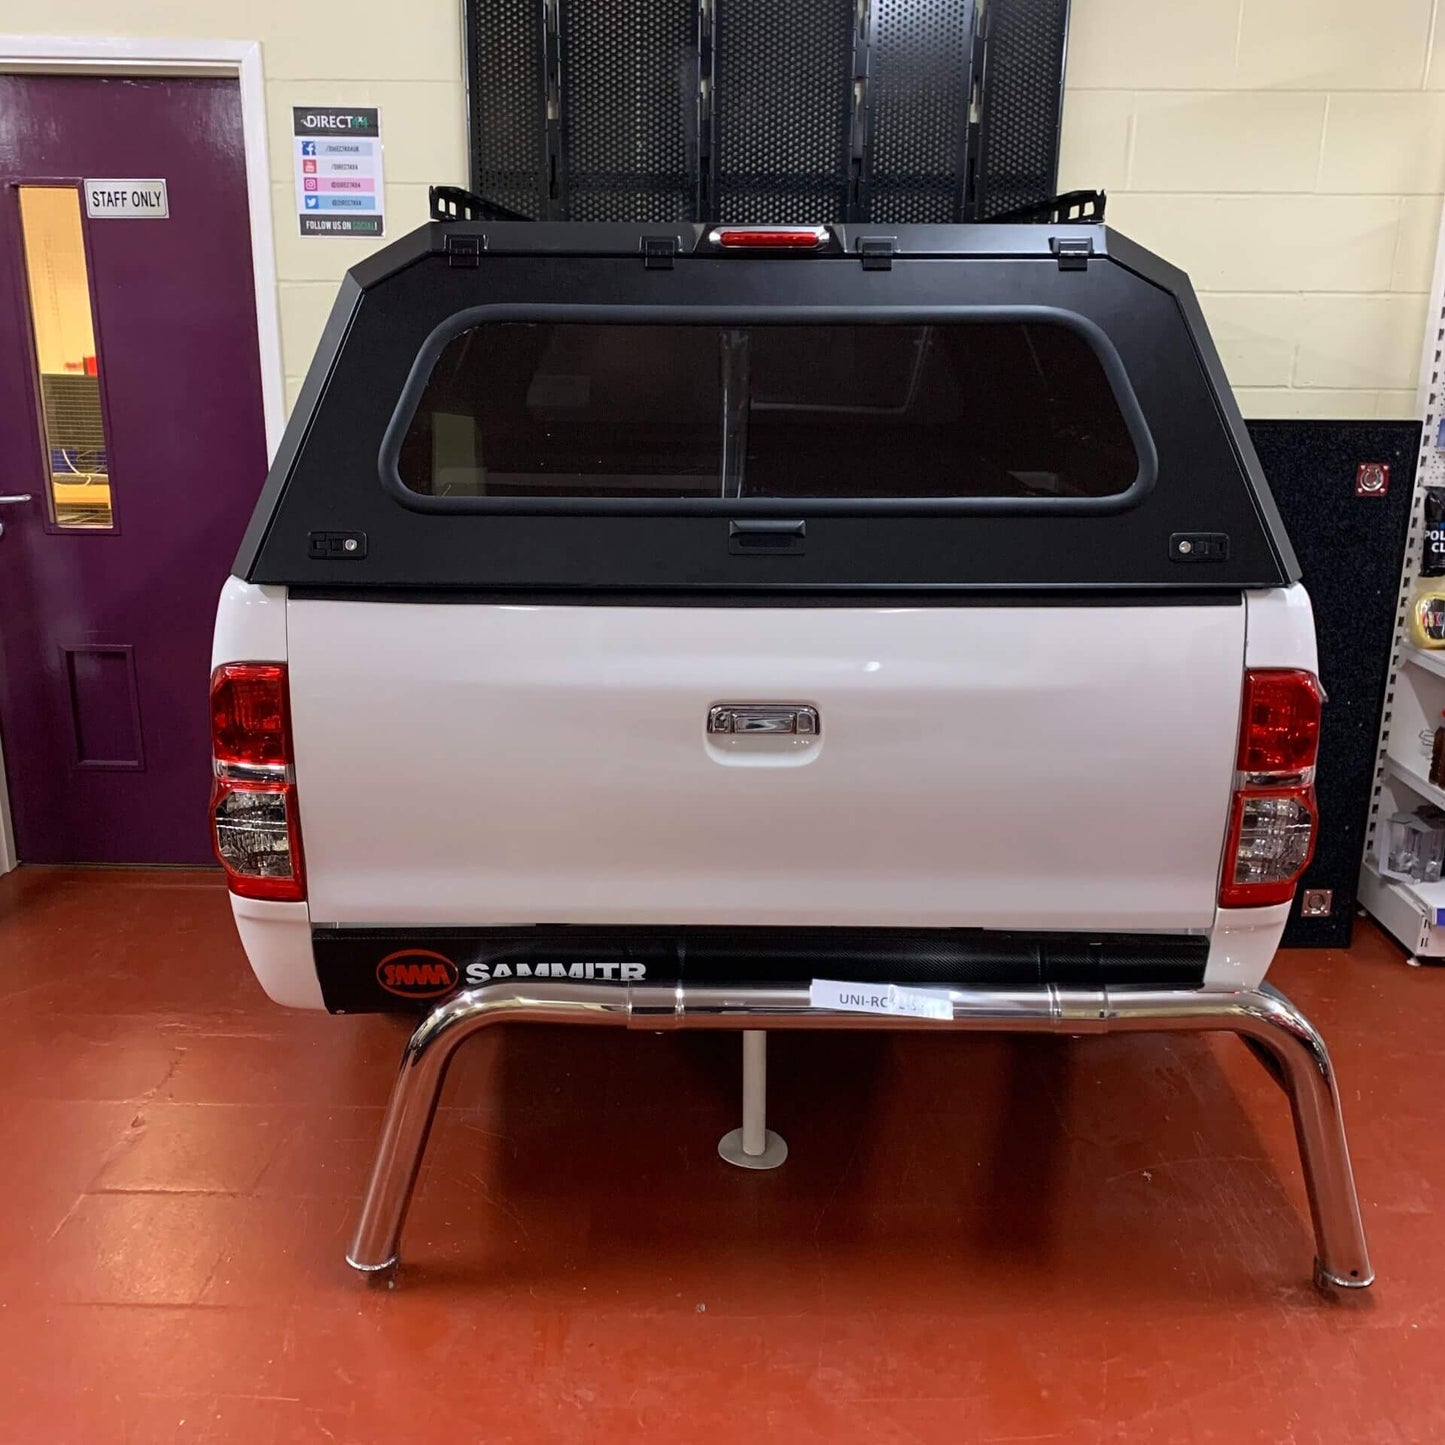 Aluminium Load Bed Canopy for the Ford Ranger 2012+ MK3 T6 (P375) Double Cab